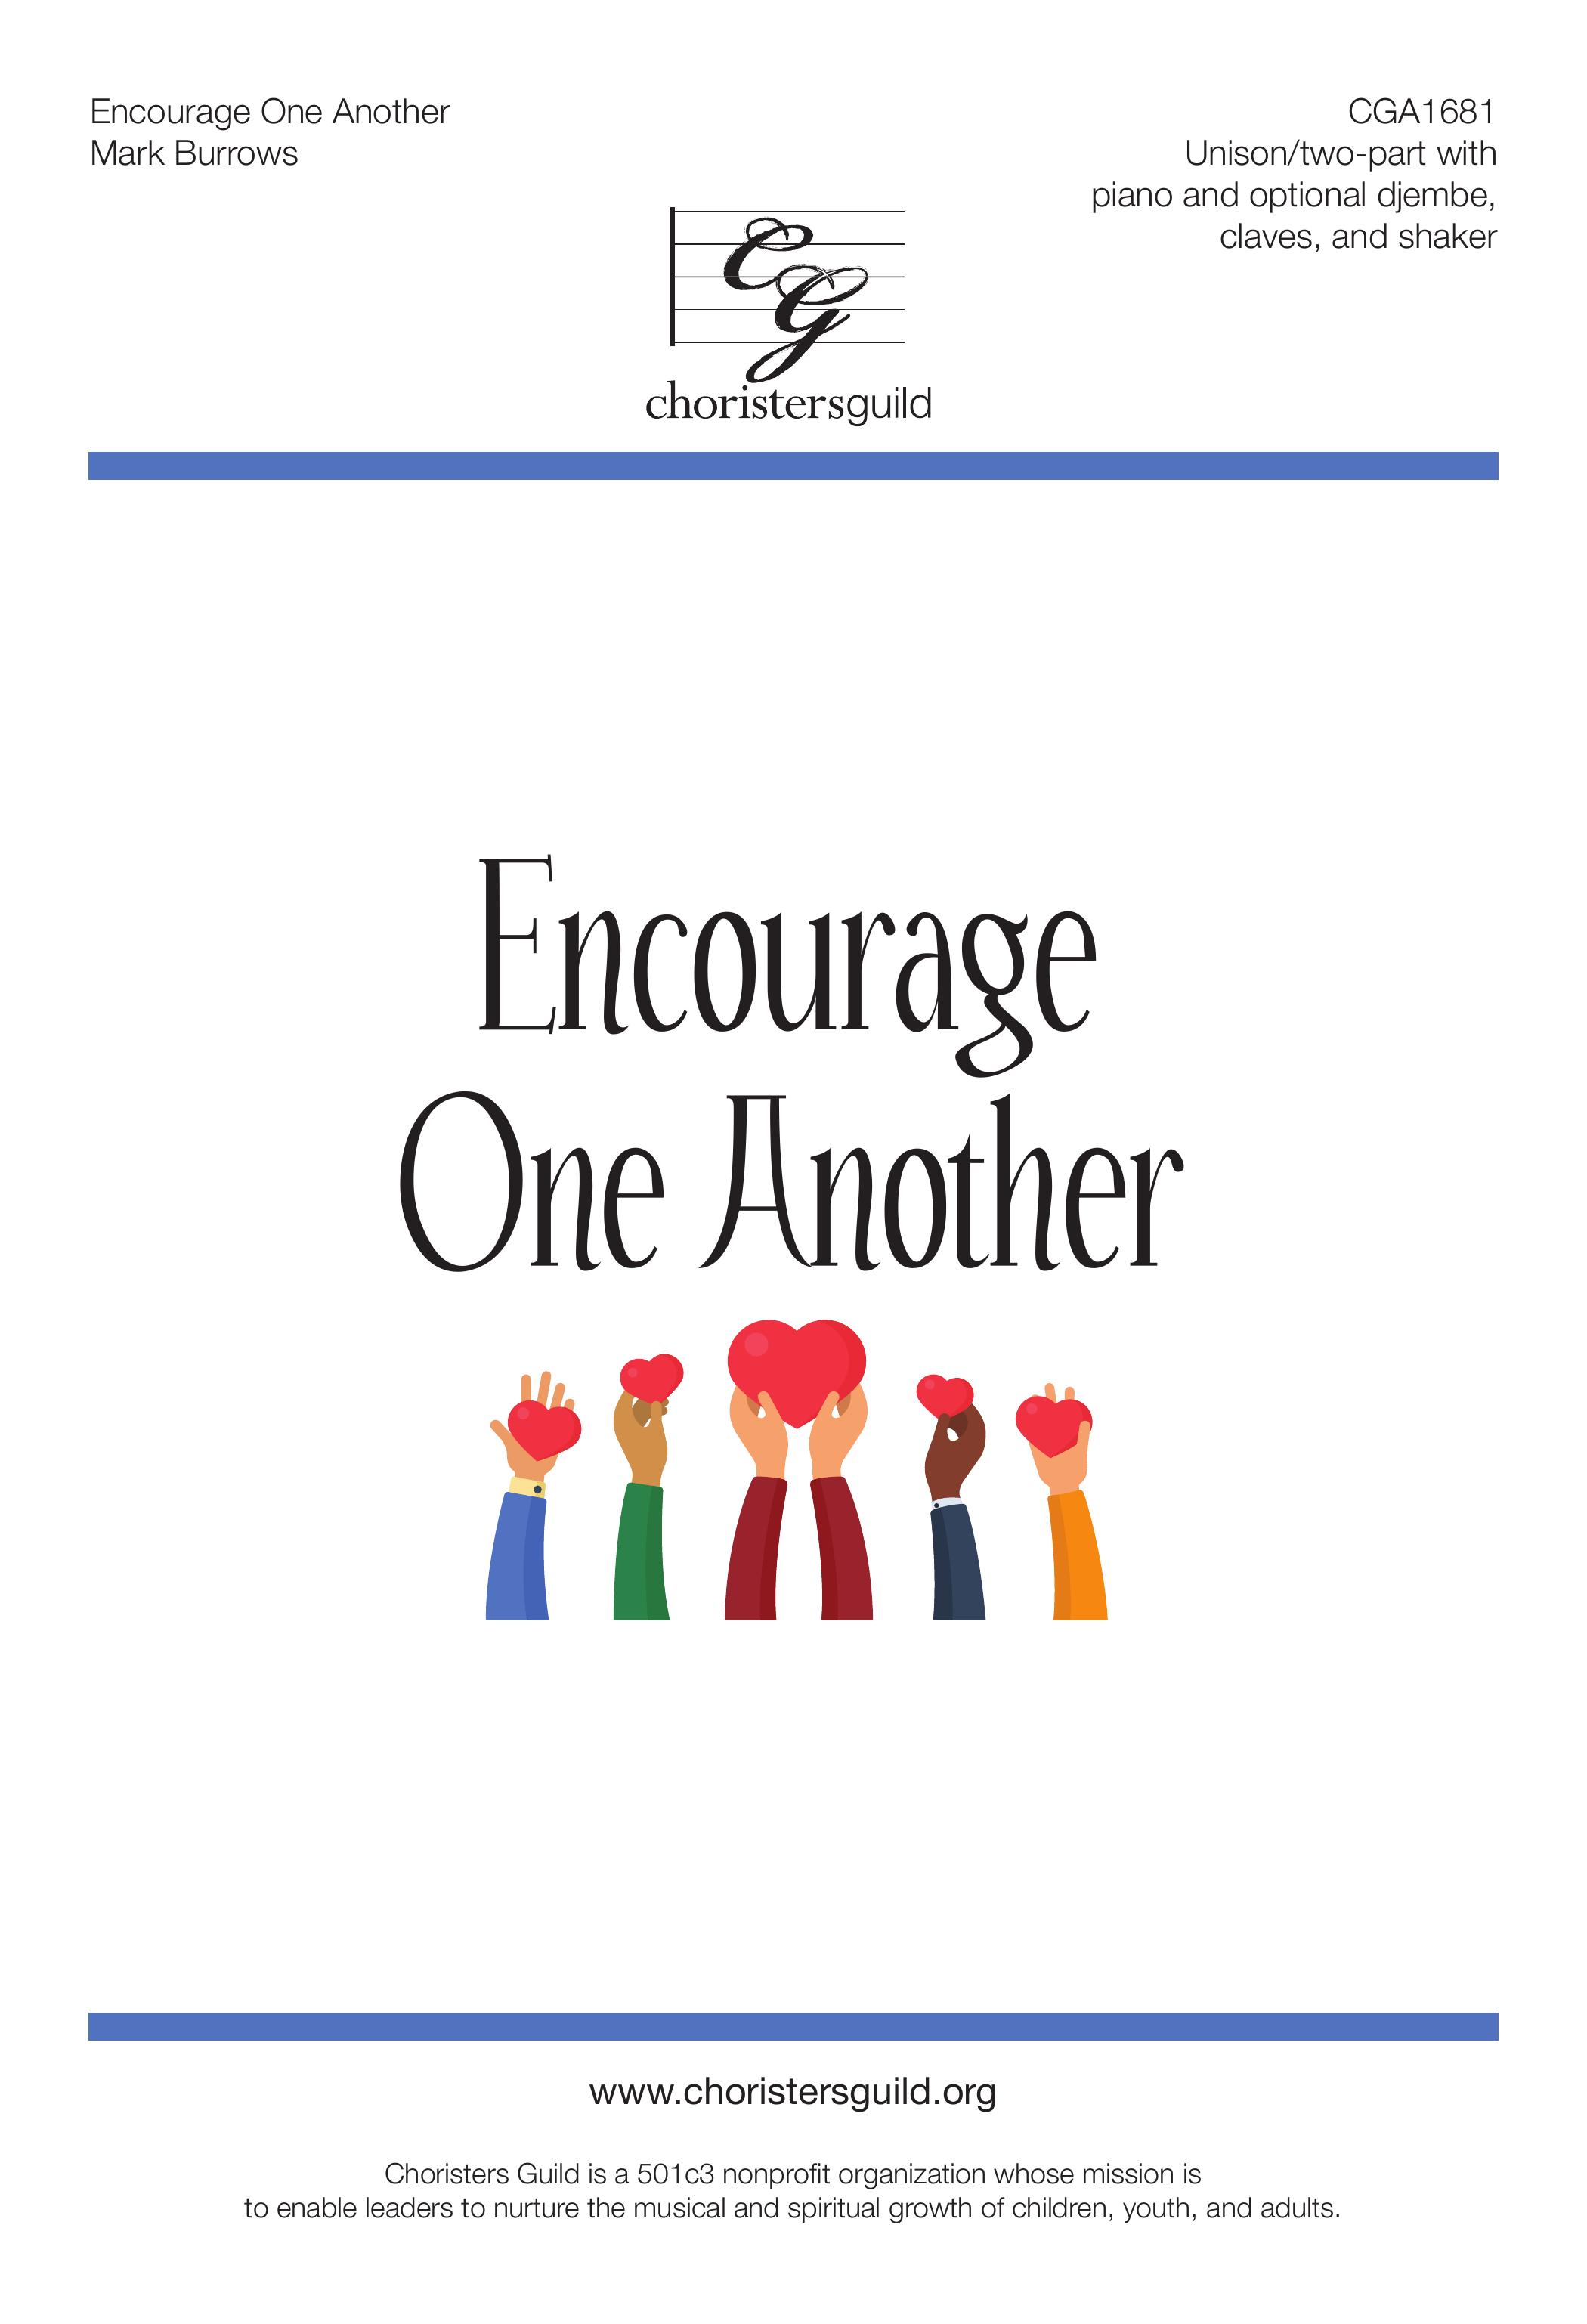 Encourage One Another - Unison/Two-part